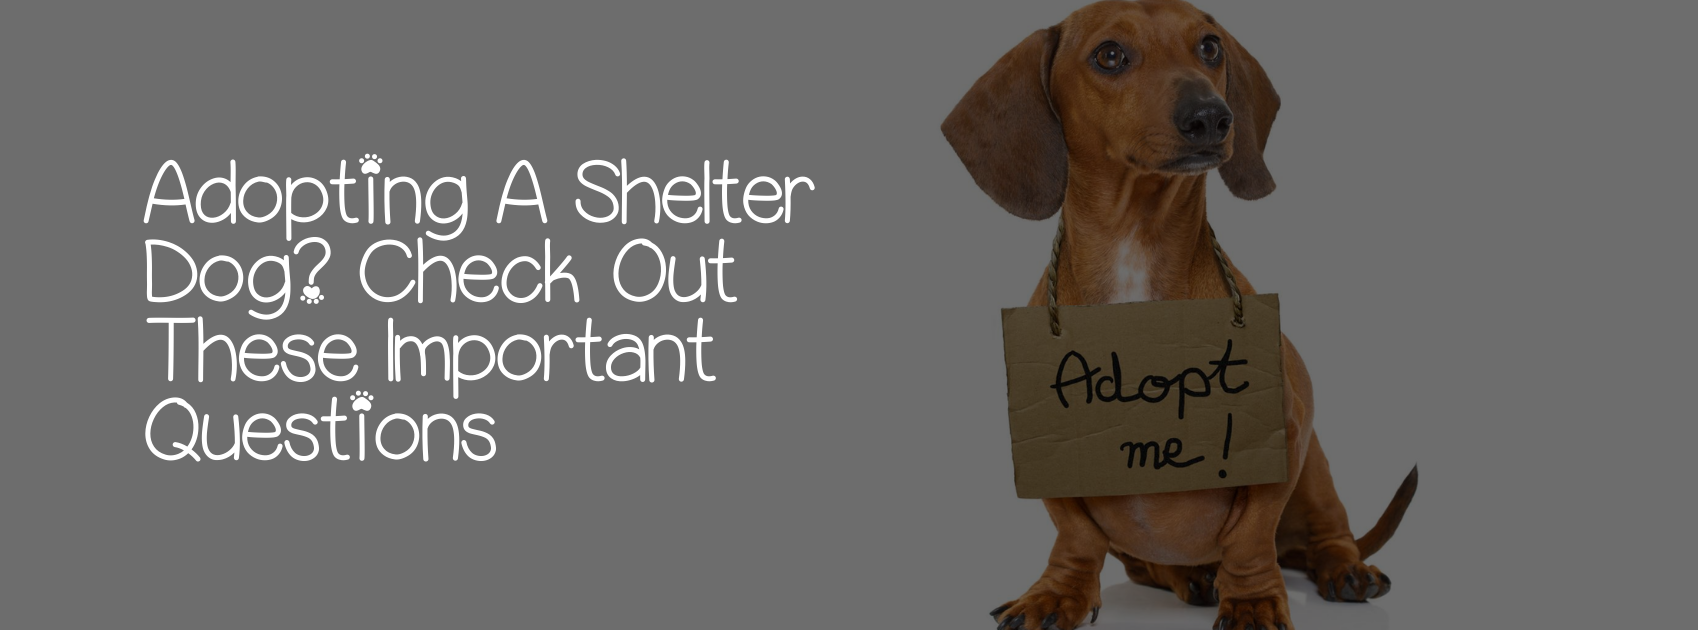 ADOPTING A SHELTER DOG? CHECK OUT THESE IMPORTANT QUESTIONS